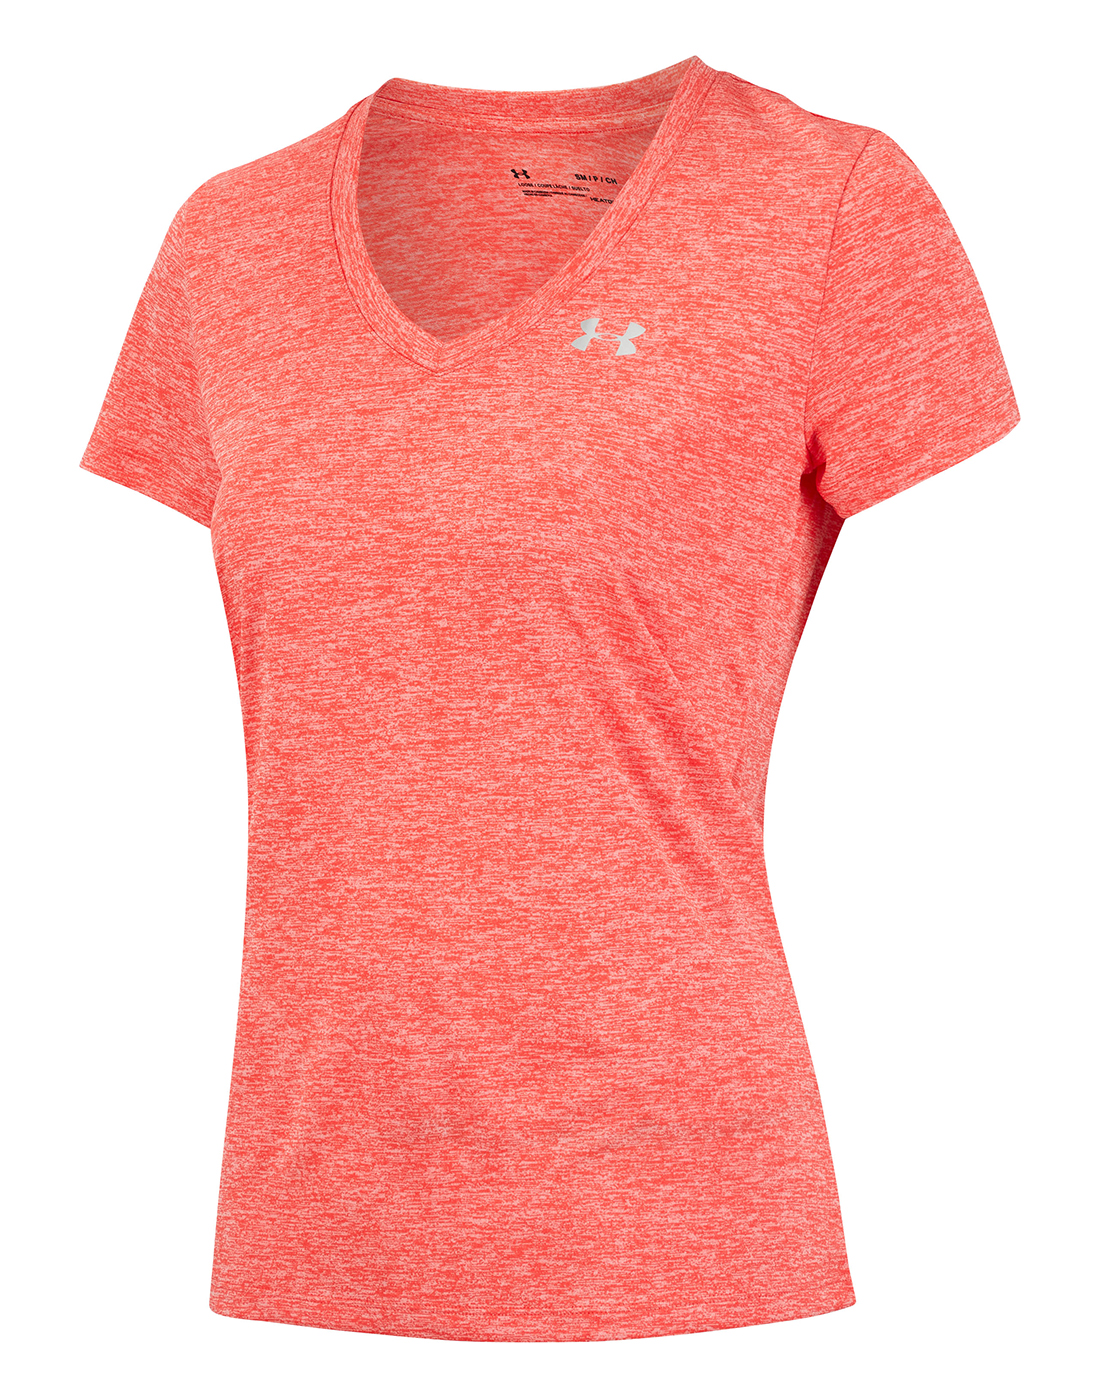 Under Armour Womens Tech T-shirt - Red | Life Style Sports IE